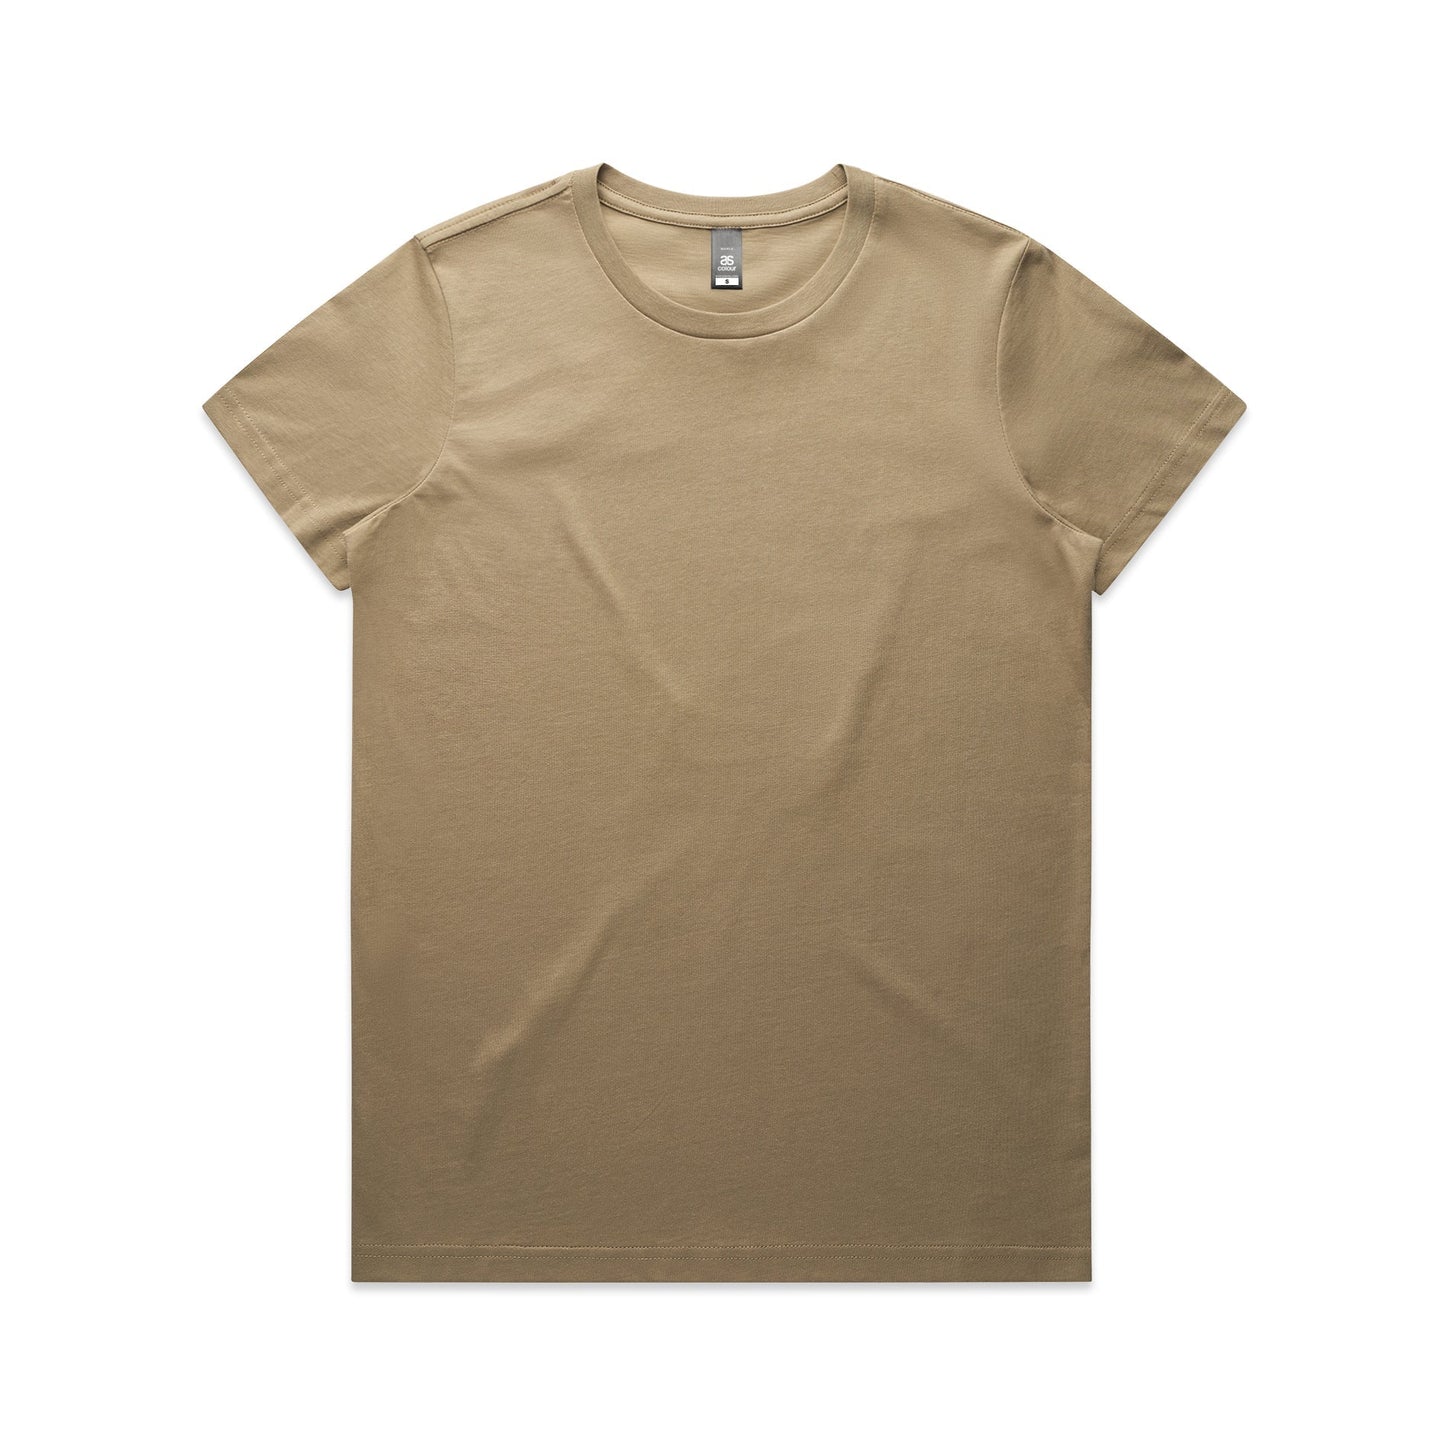 "You're a Paleontologist" Relaxed Maple T-Shirt